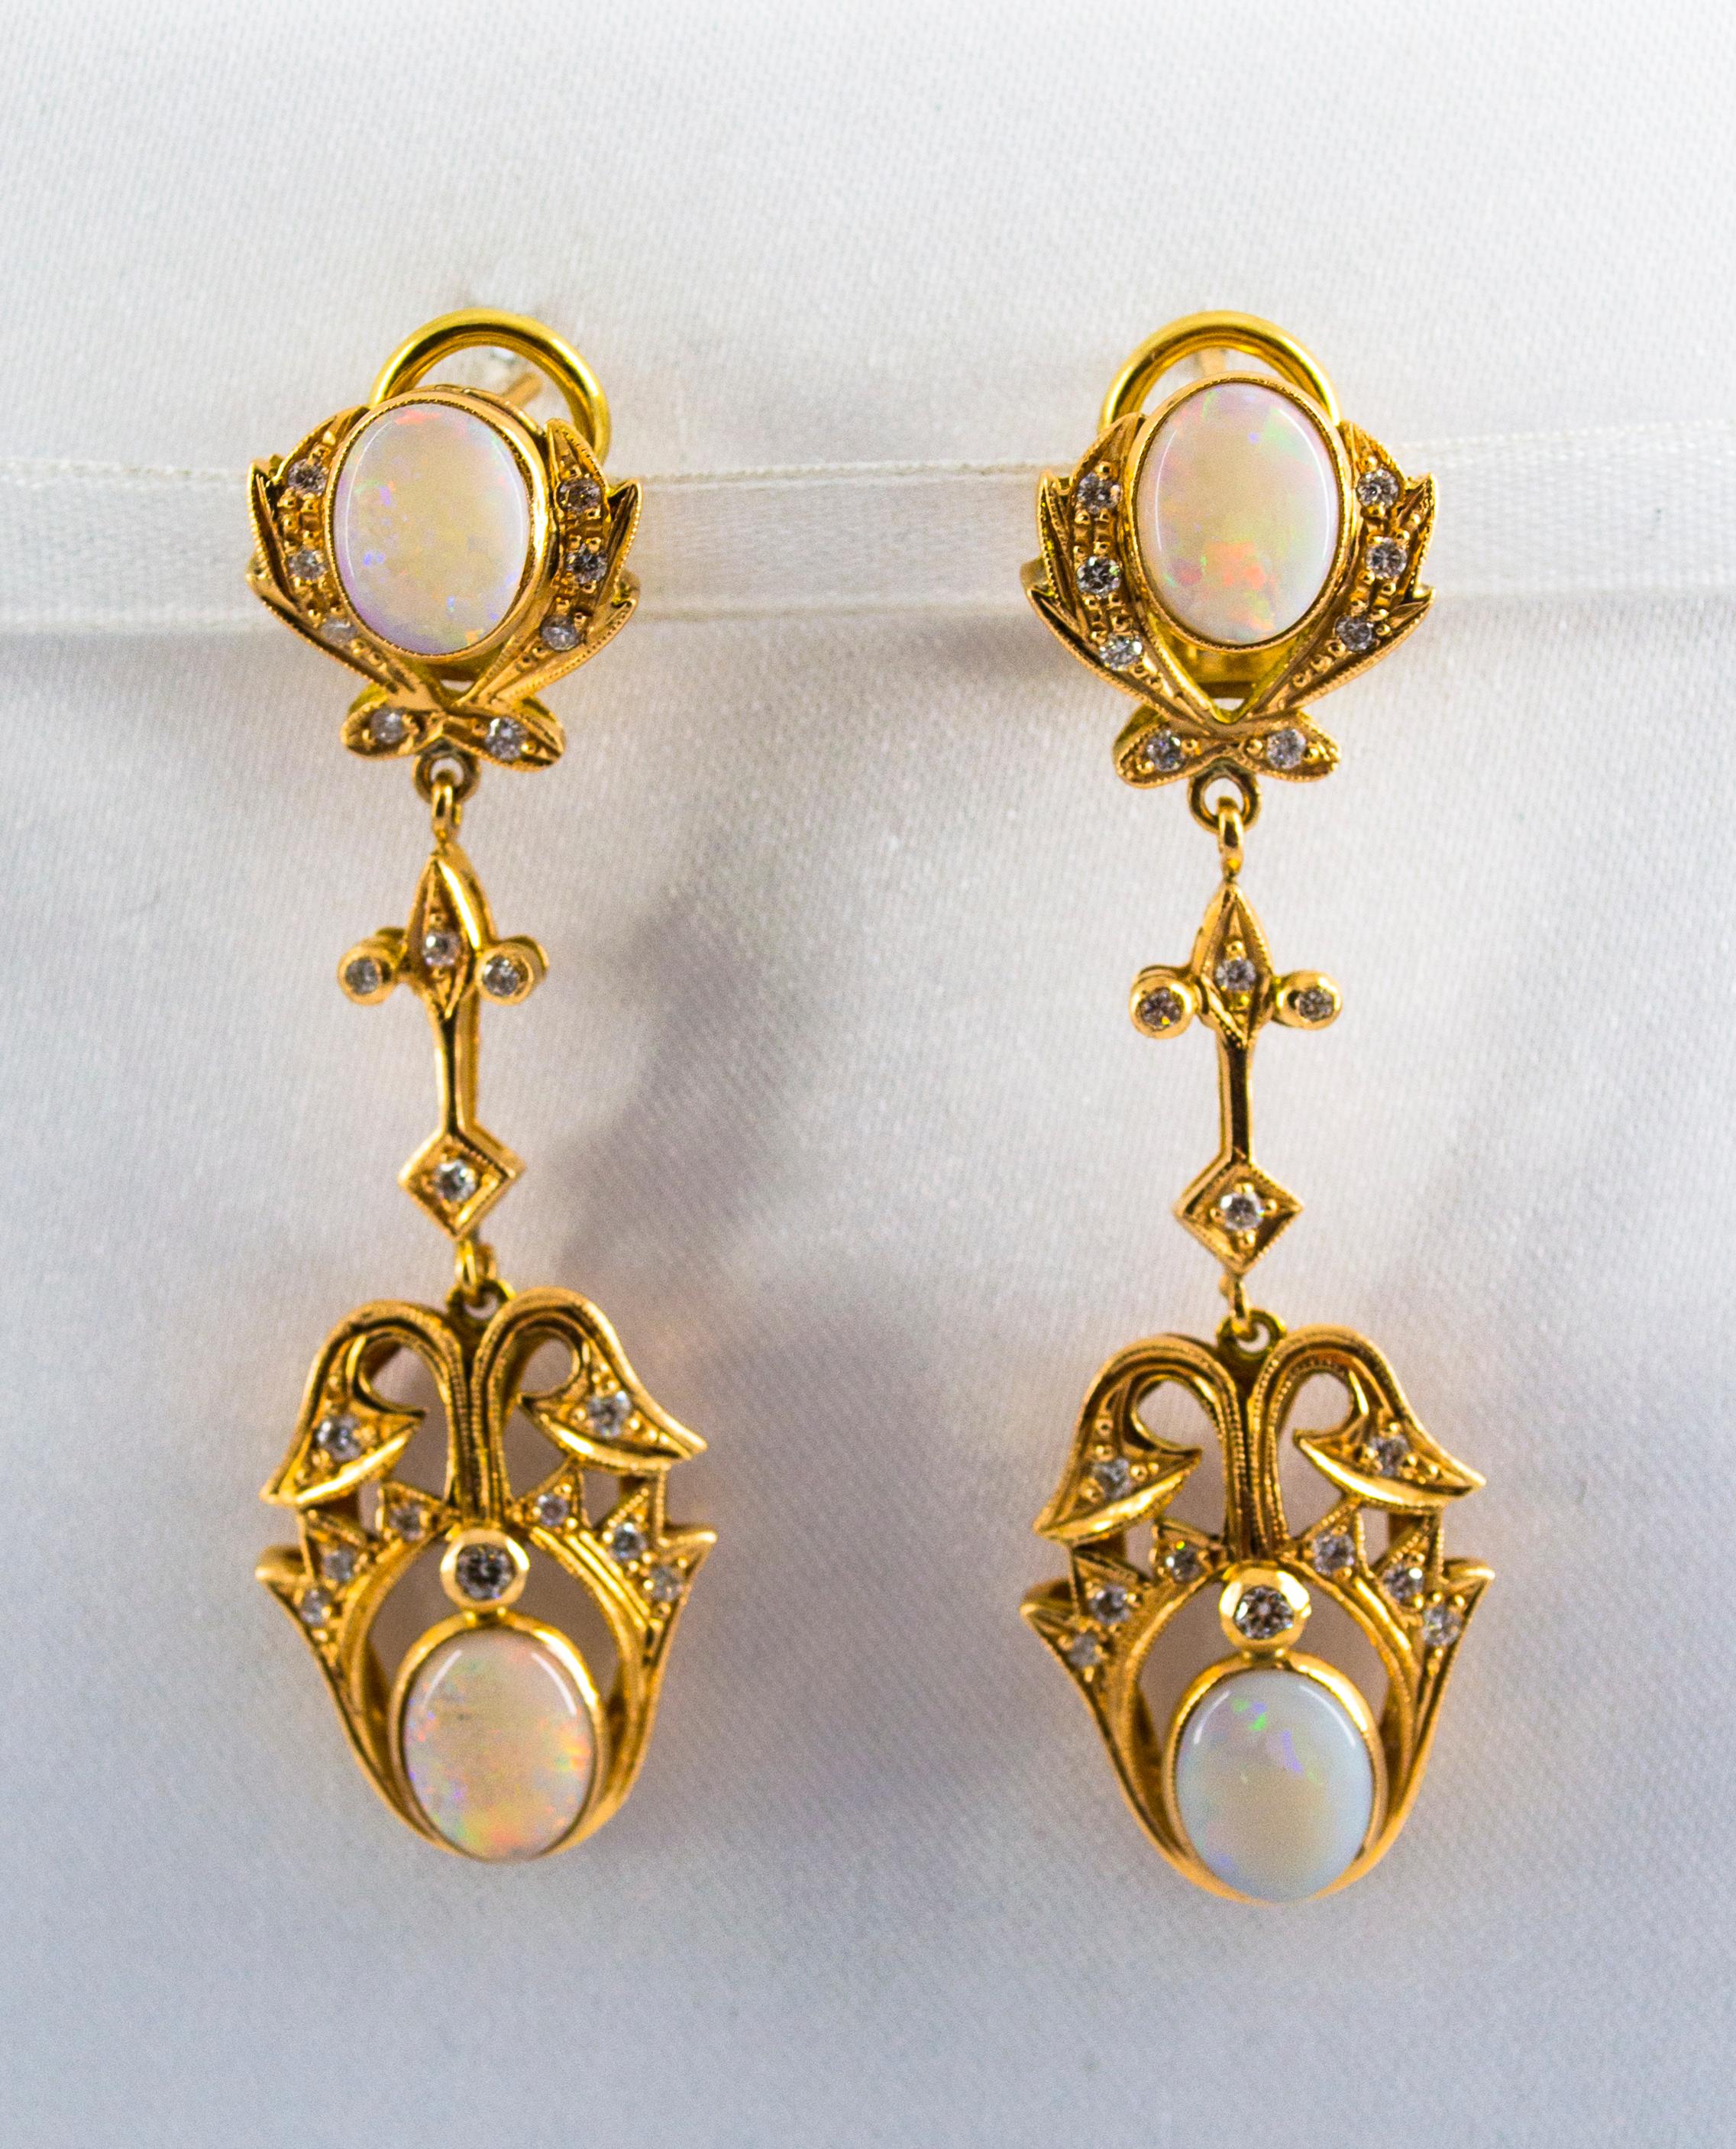 These Earrings are made of 14K Yellow Gold.
These Earrings have 0.90 Carats of White Diamonds.
These Earrings have 3.90 Carats of Opals.
We're a workshop so every piece is handmade, customizable and resizable.